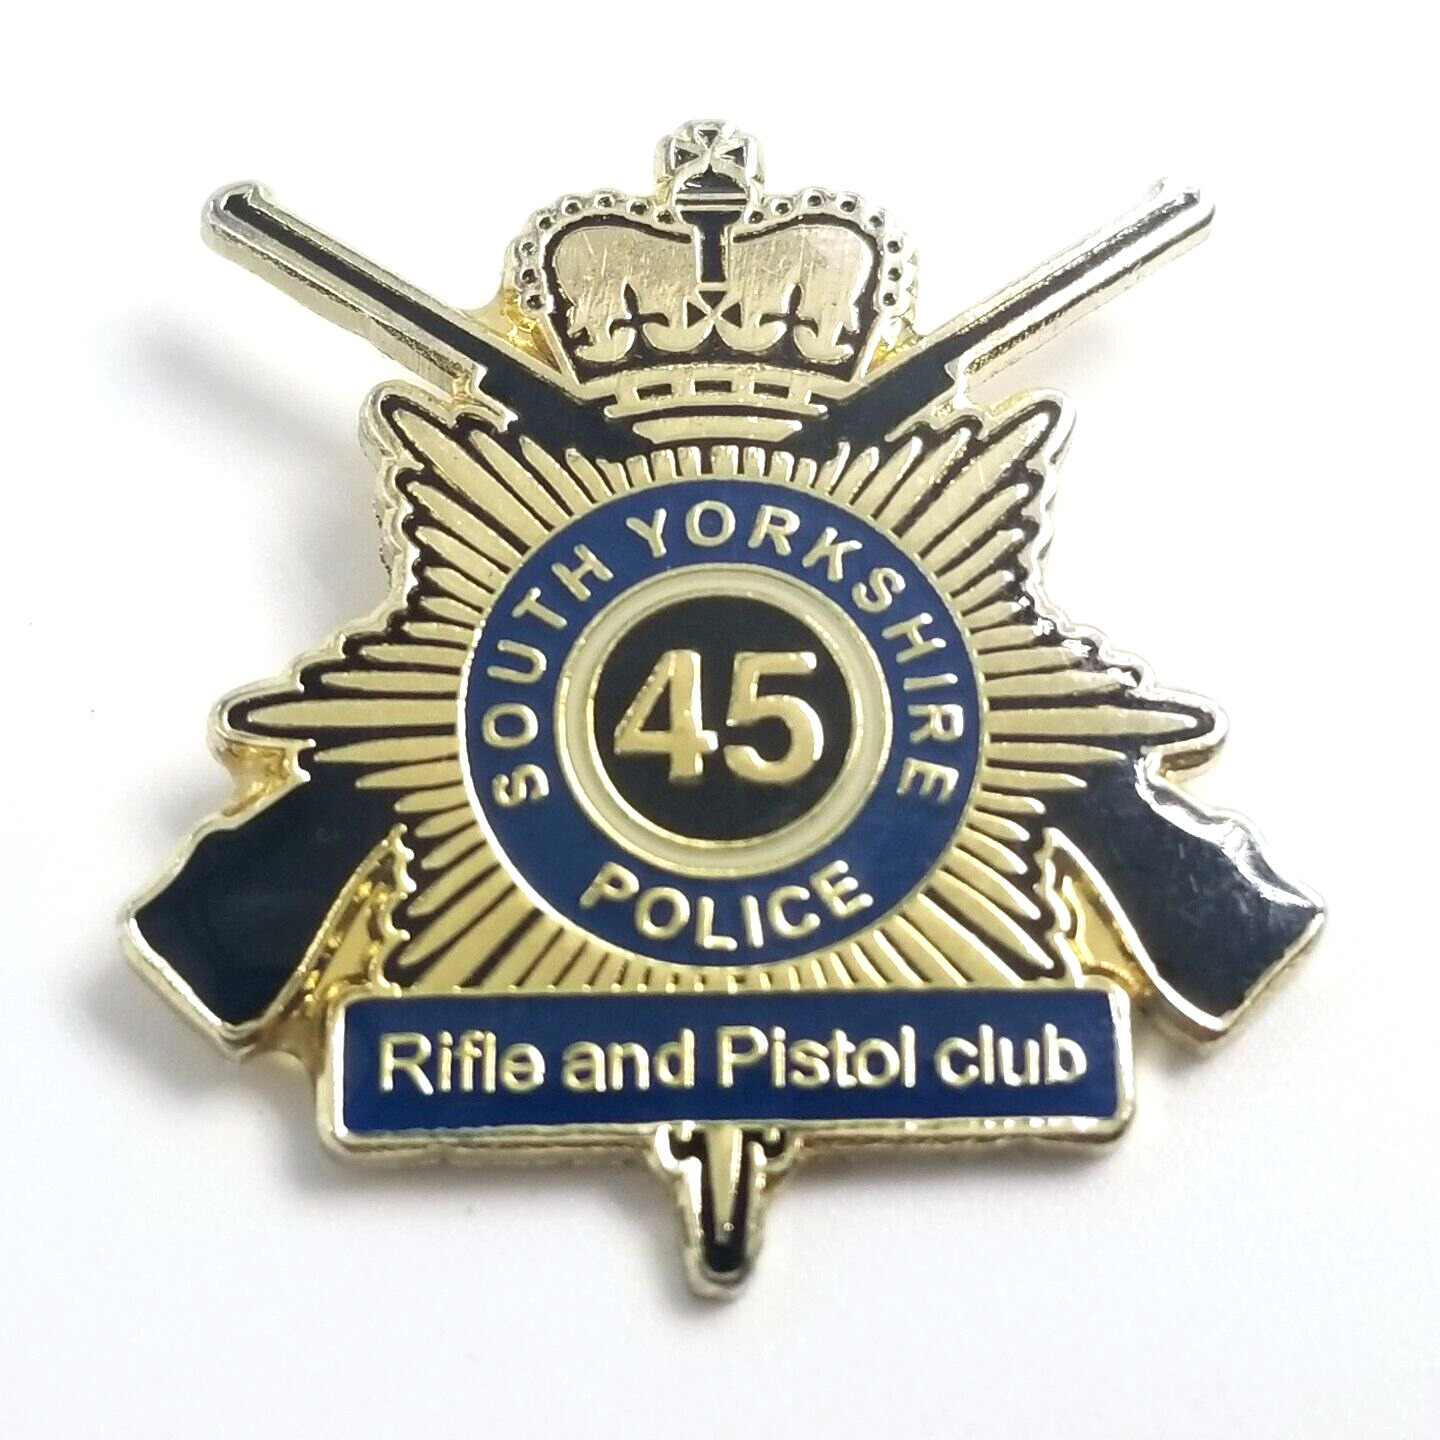 South Yorkshire Police England Rifle And Pistol Club Member Gold Tone Lapel Pin